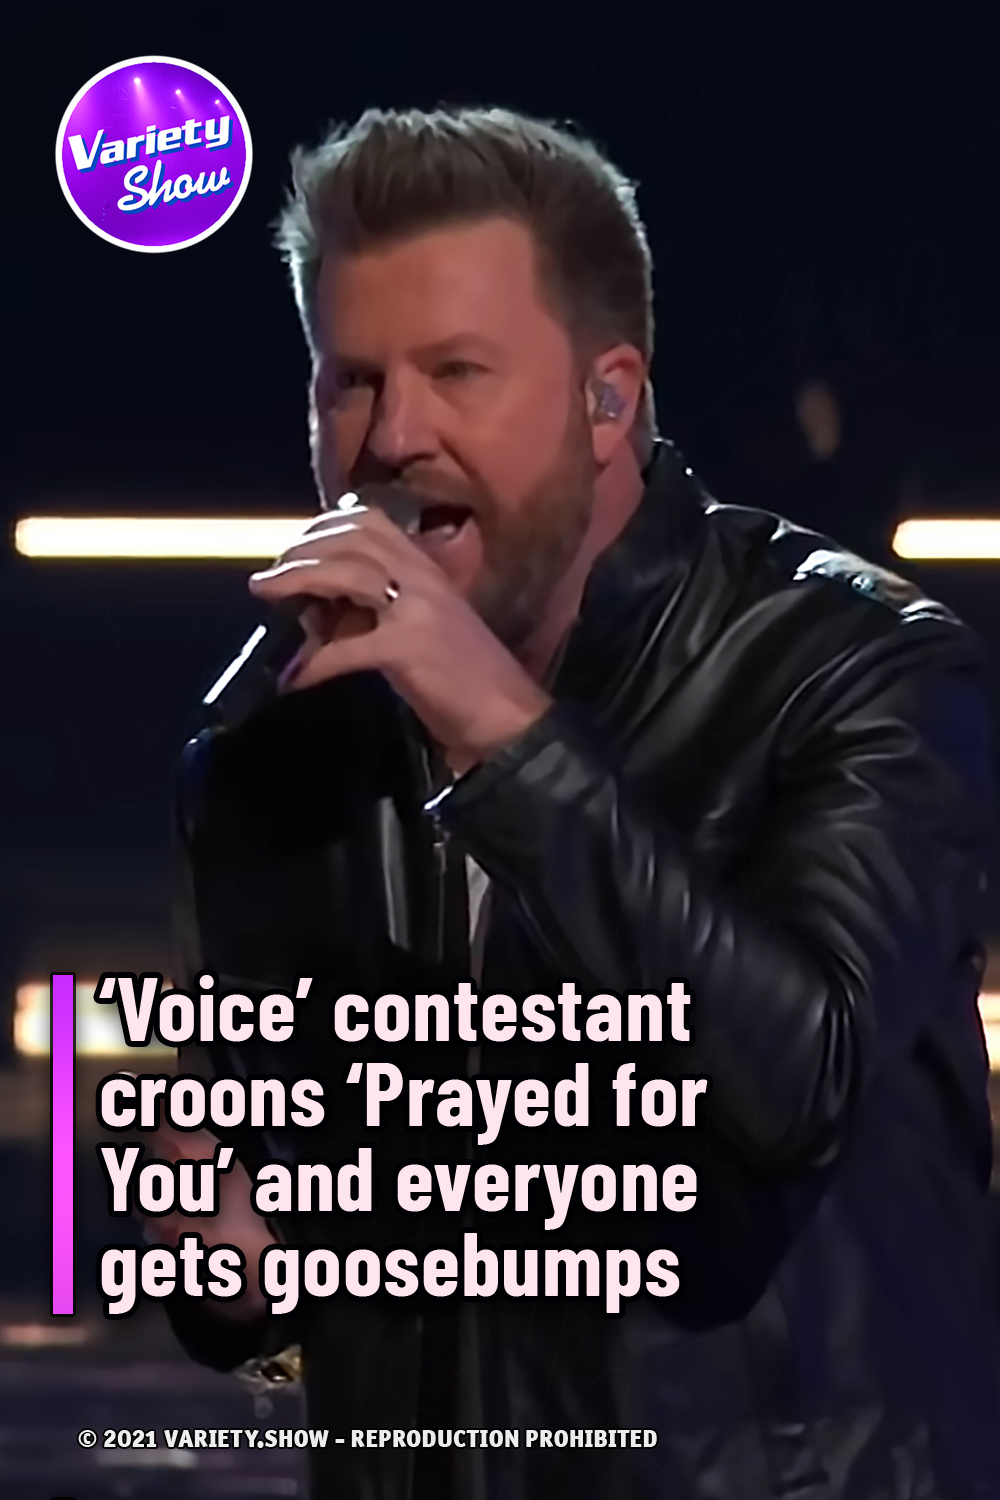 ‘Voice’ contestant croons ‘Prayed for You’ and everyone gets goosebumps